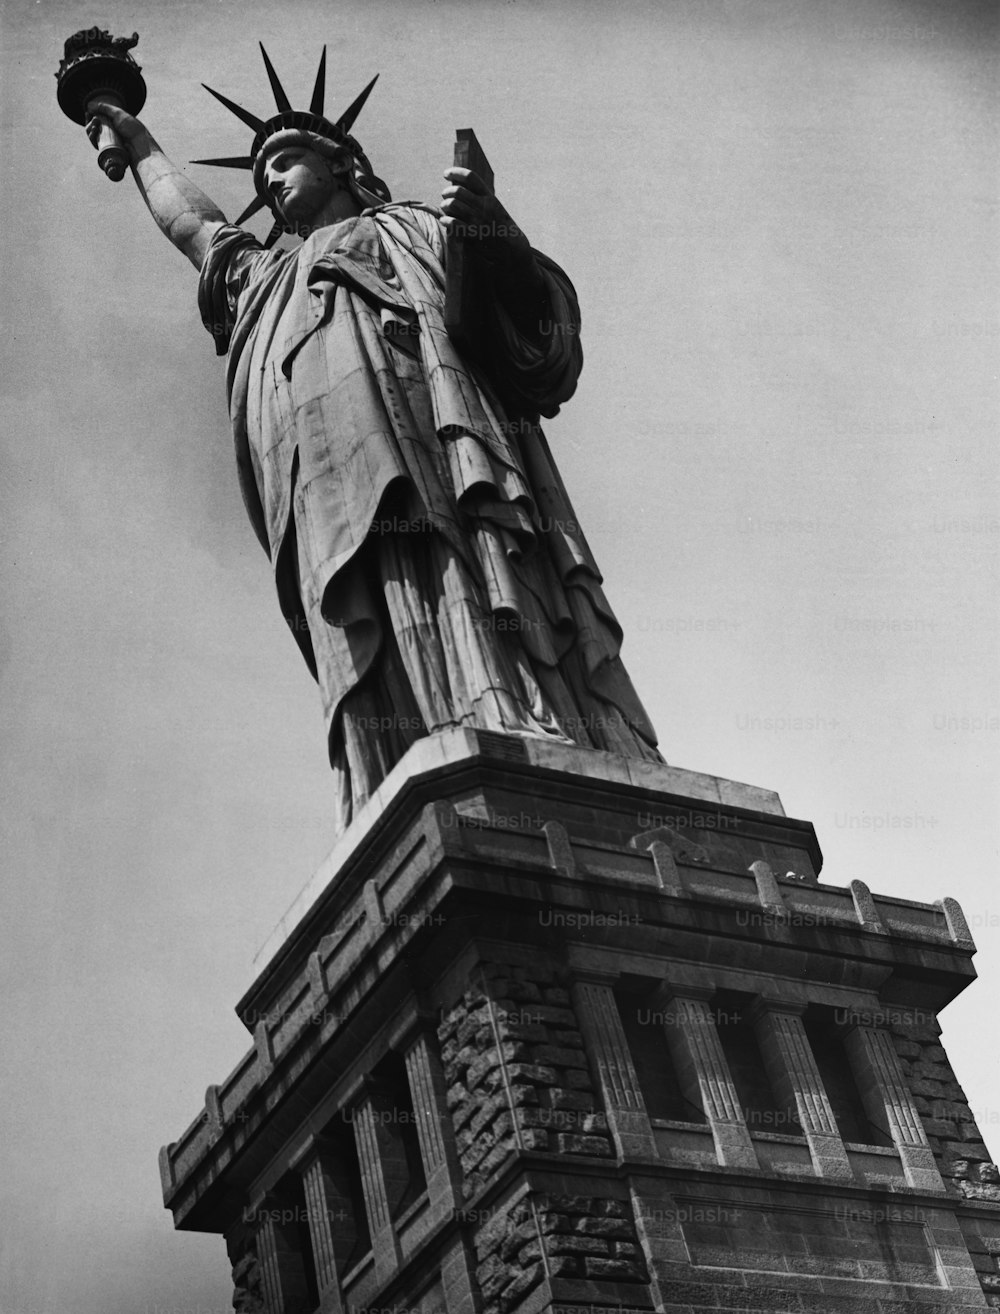 The Statue of Liberty on Liberty Island in New York City, USA, circa 1950.  (Photo by George Marks/Retrofile/Getty Images)